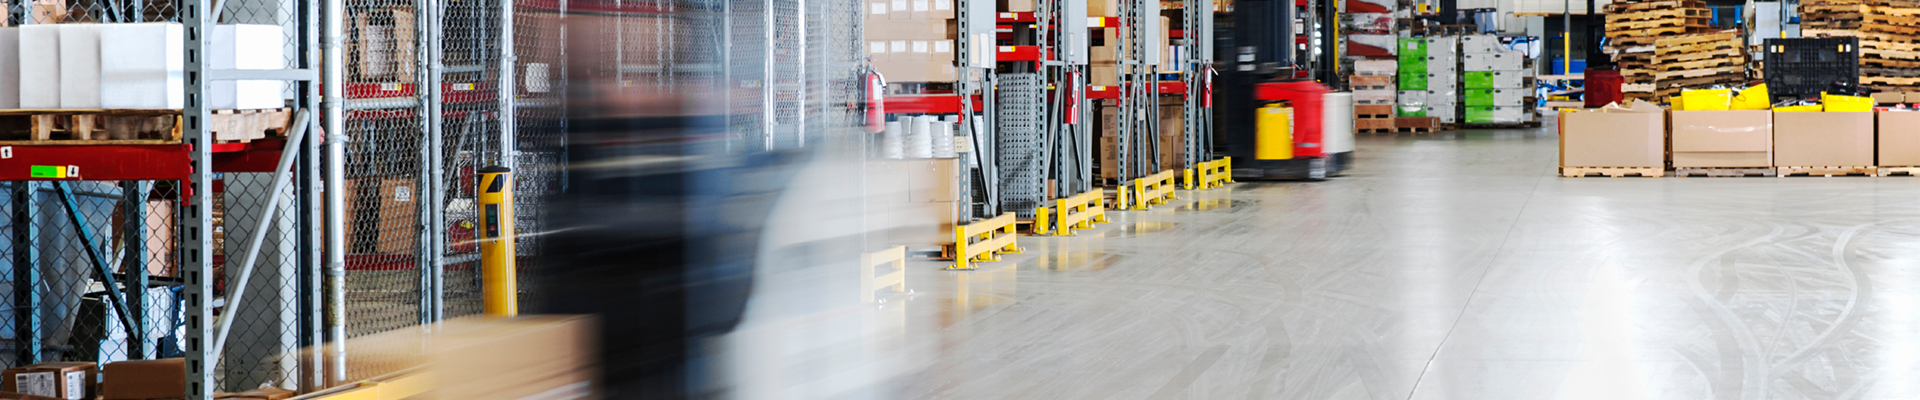 5 Inexpensive Ways to Reduce The Occurrence of Forklift Accidents